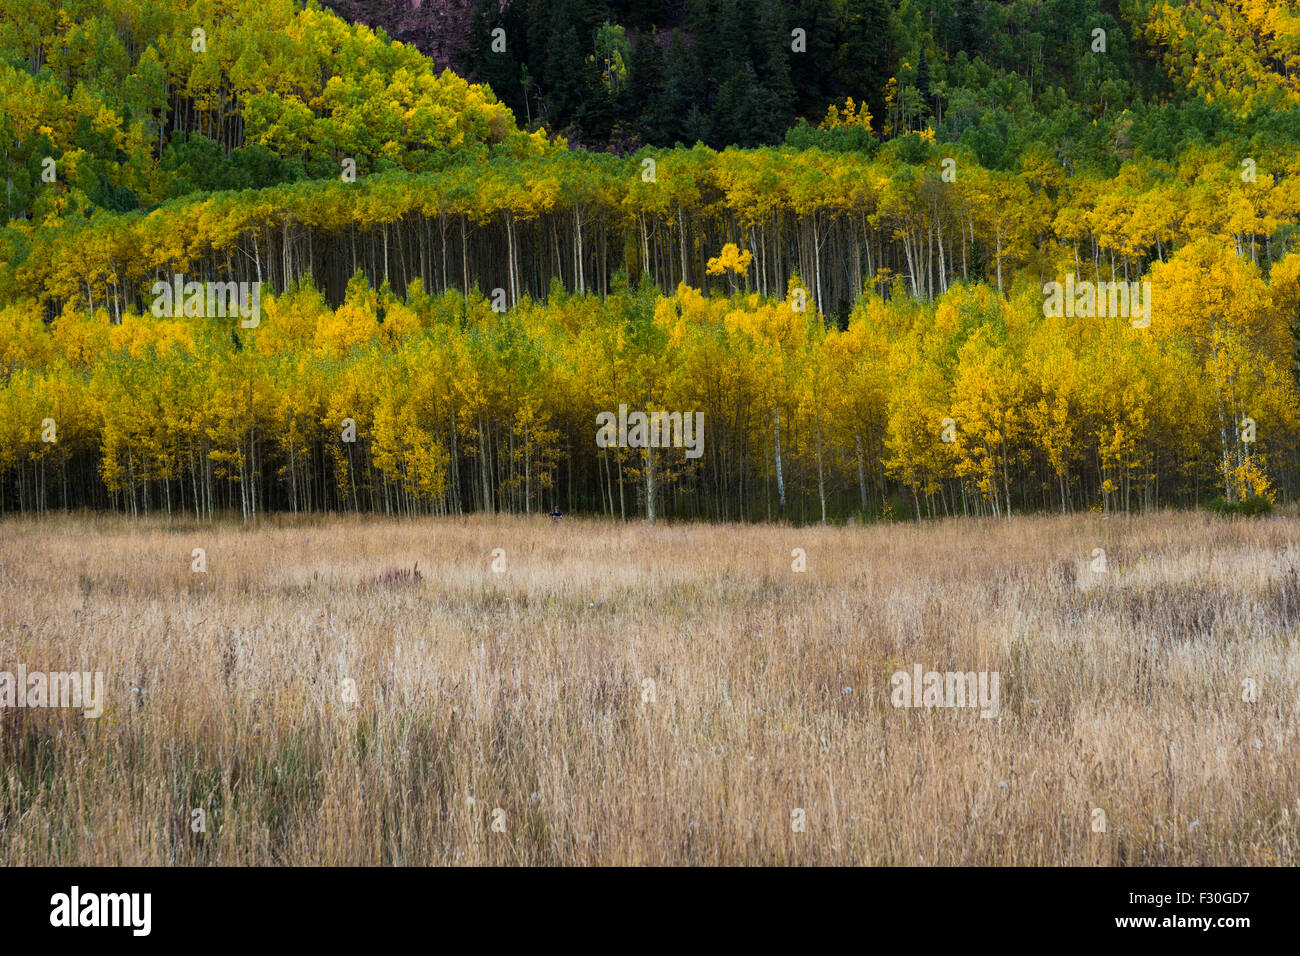 Aspen Trees in Fall with changing colors and long grass Stock Photo